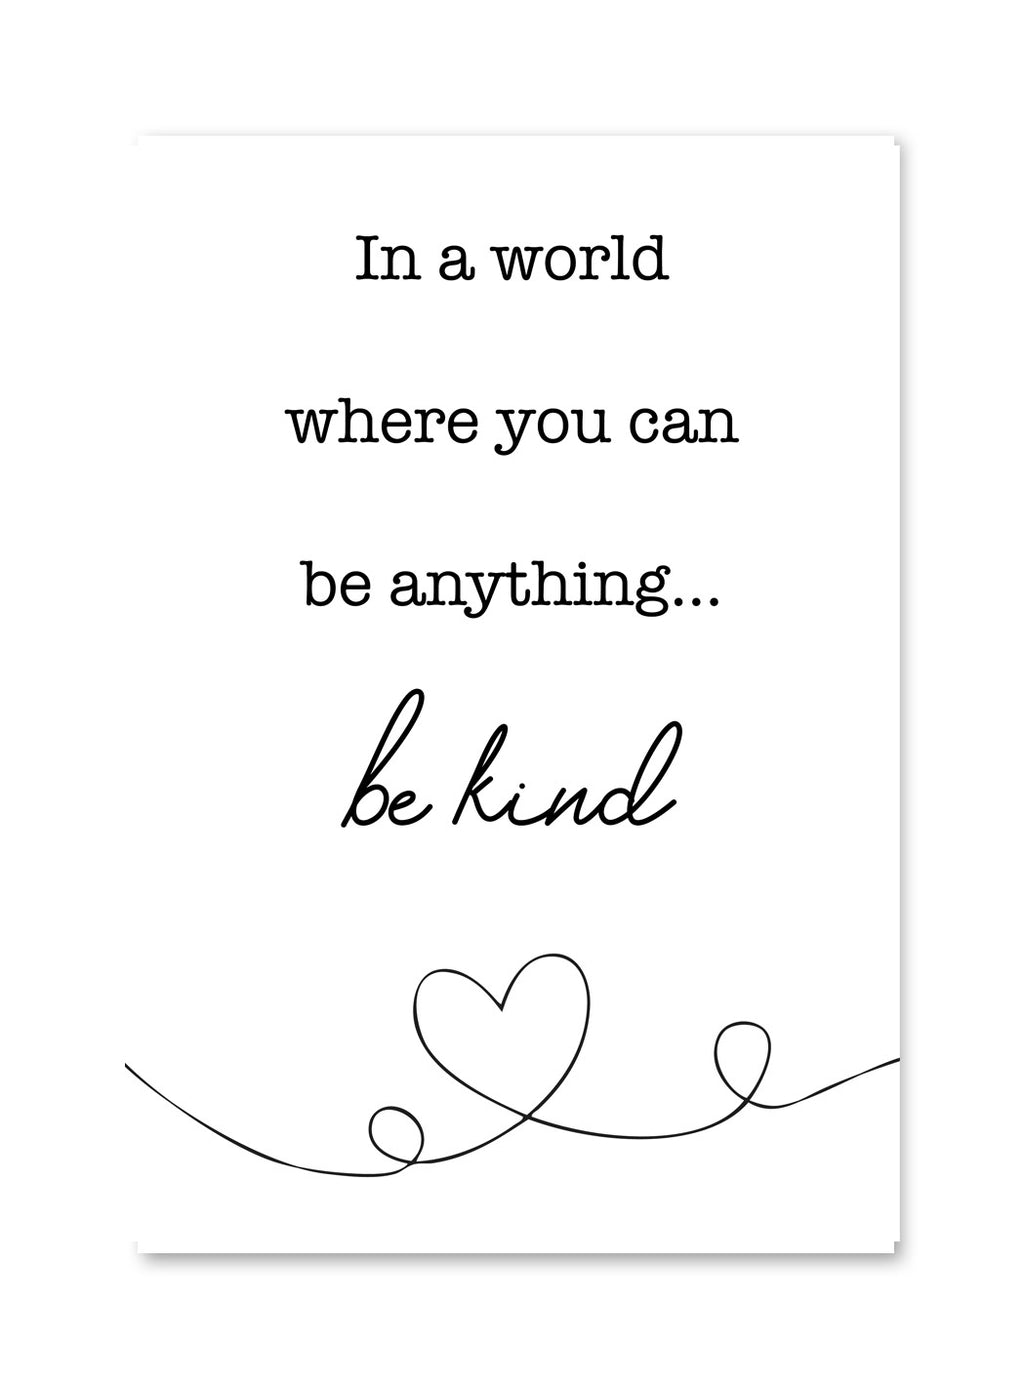 Be Kind Motivational/Inspirational Wall Art 24. - Close to the Bone Greeting Cards